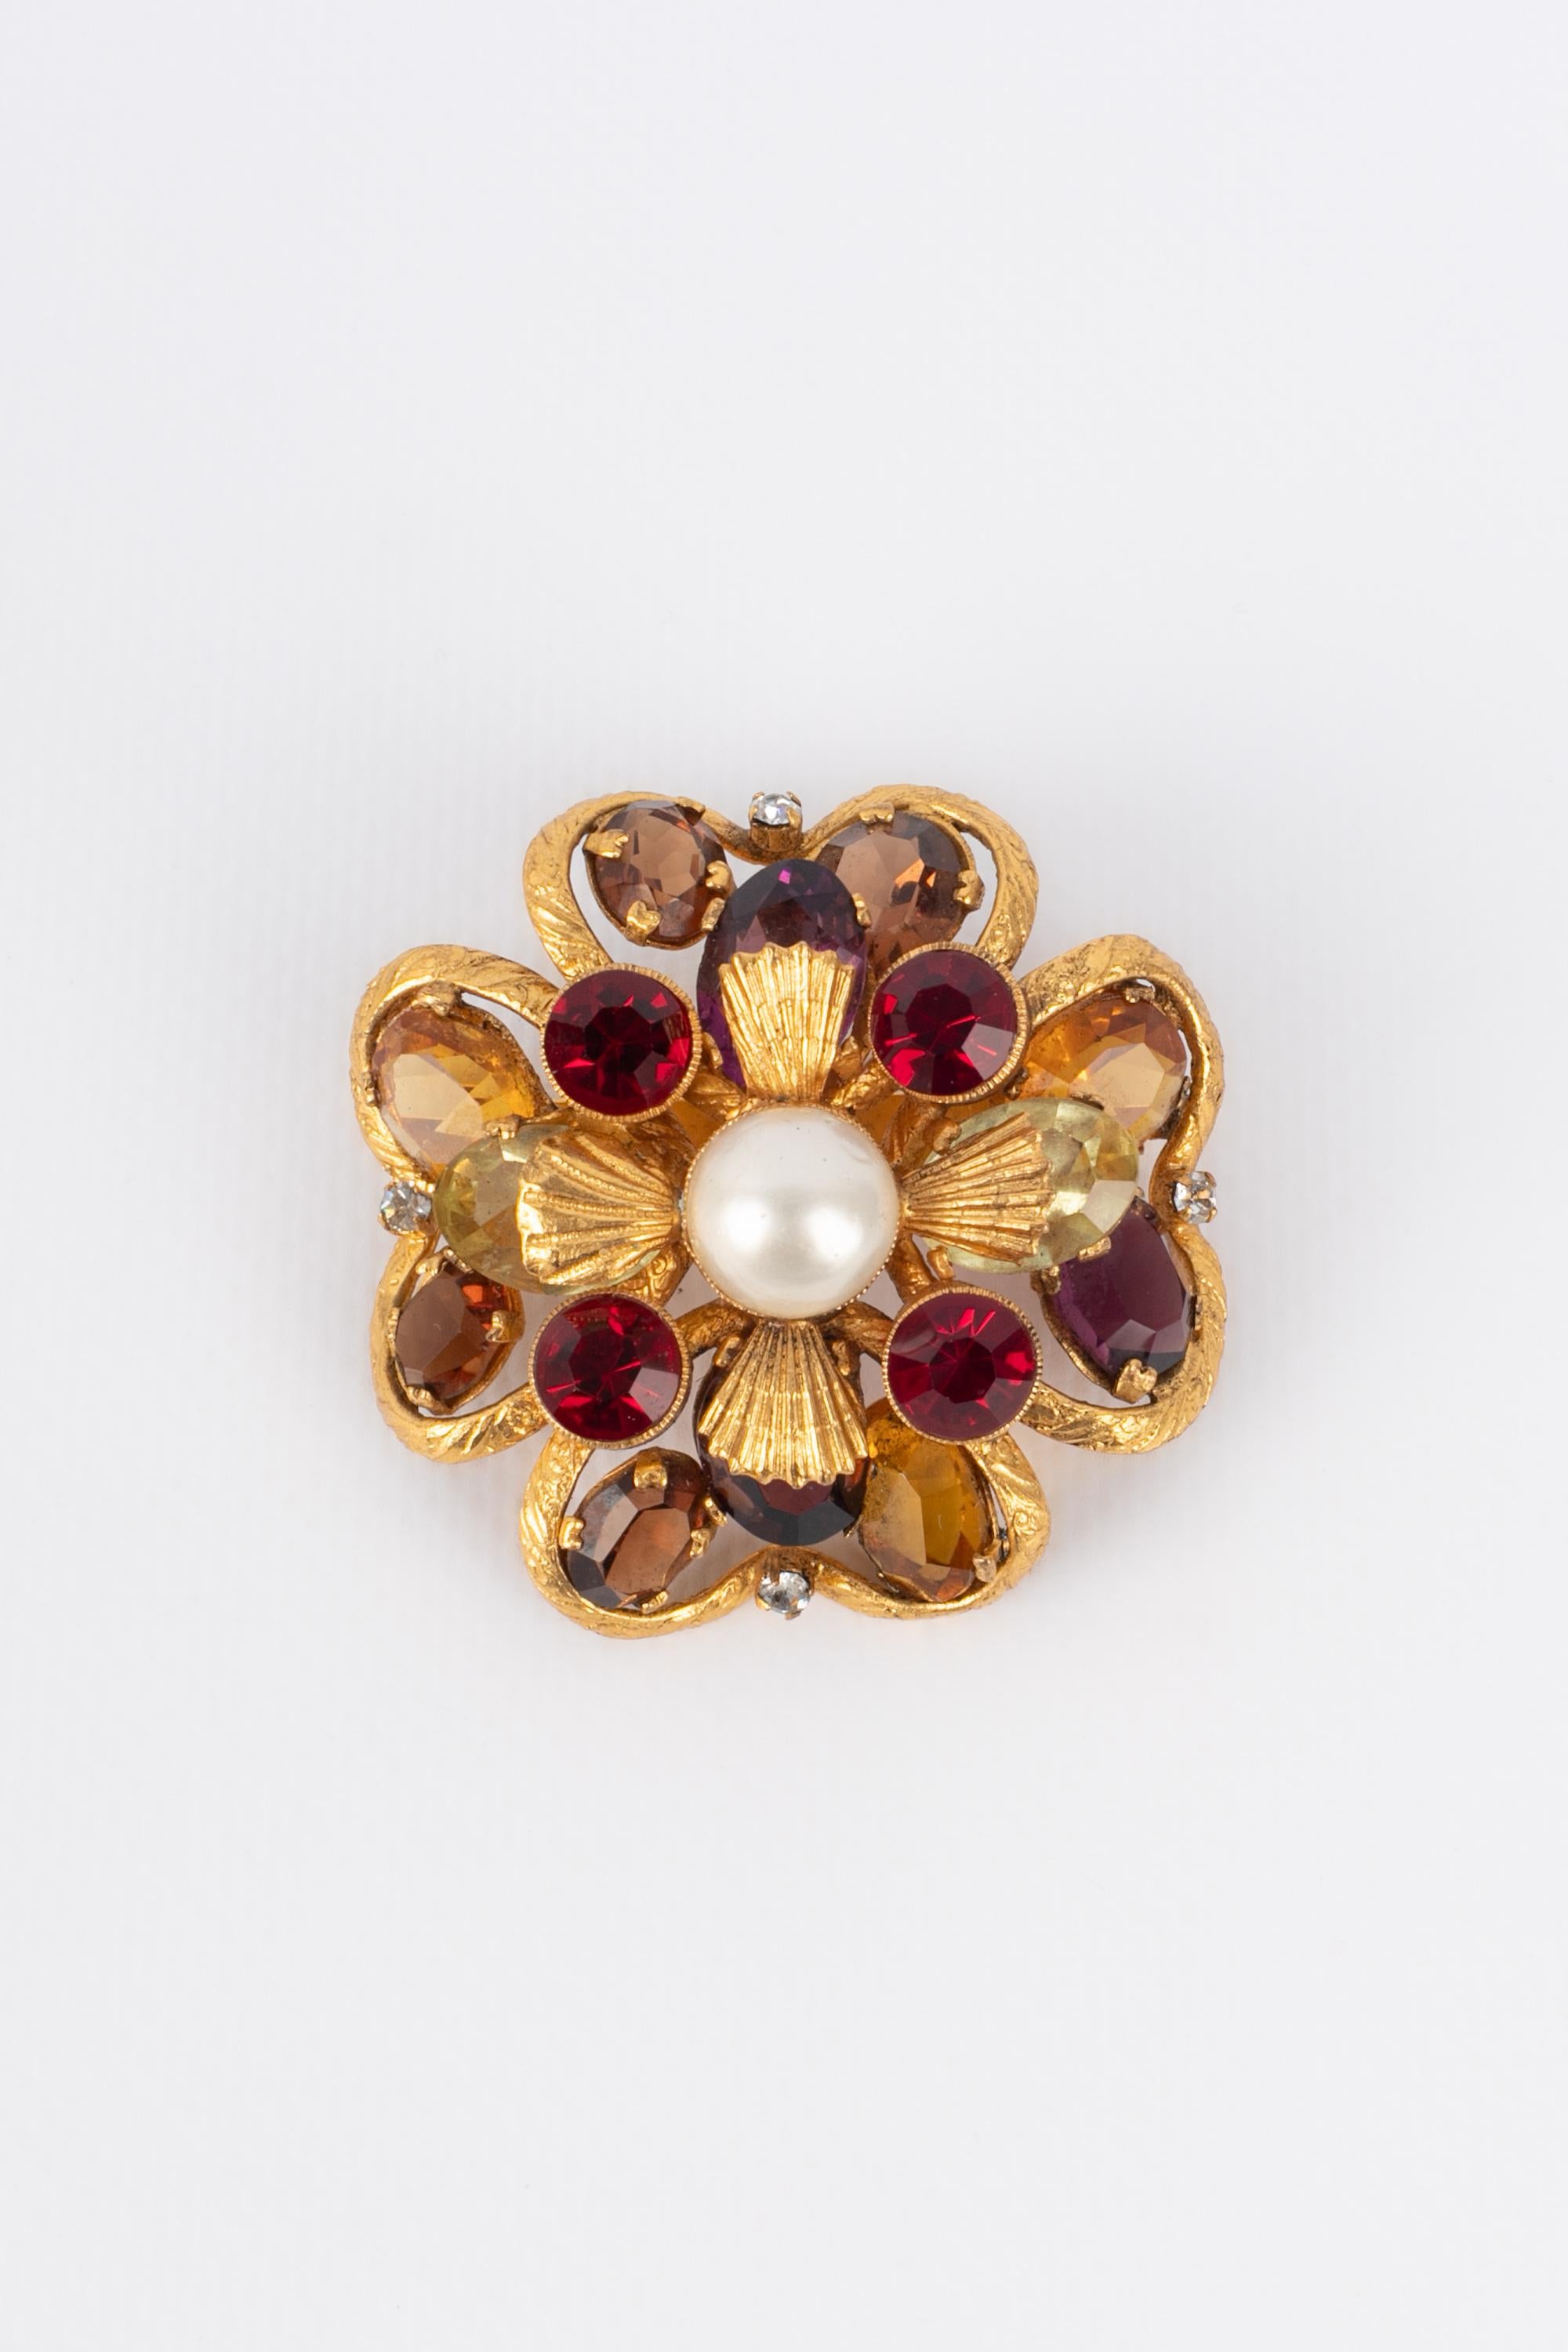 CHANEL - (Made in France) Golden metal brooch representing a flower ornamented with rhinestones and a costume pearly cabochon. Jewelry from the 1960s/1970s.

Condition:
Very good condition

Dimensions:
5 cm x 5 cm

BRB69